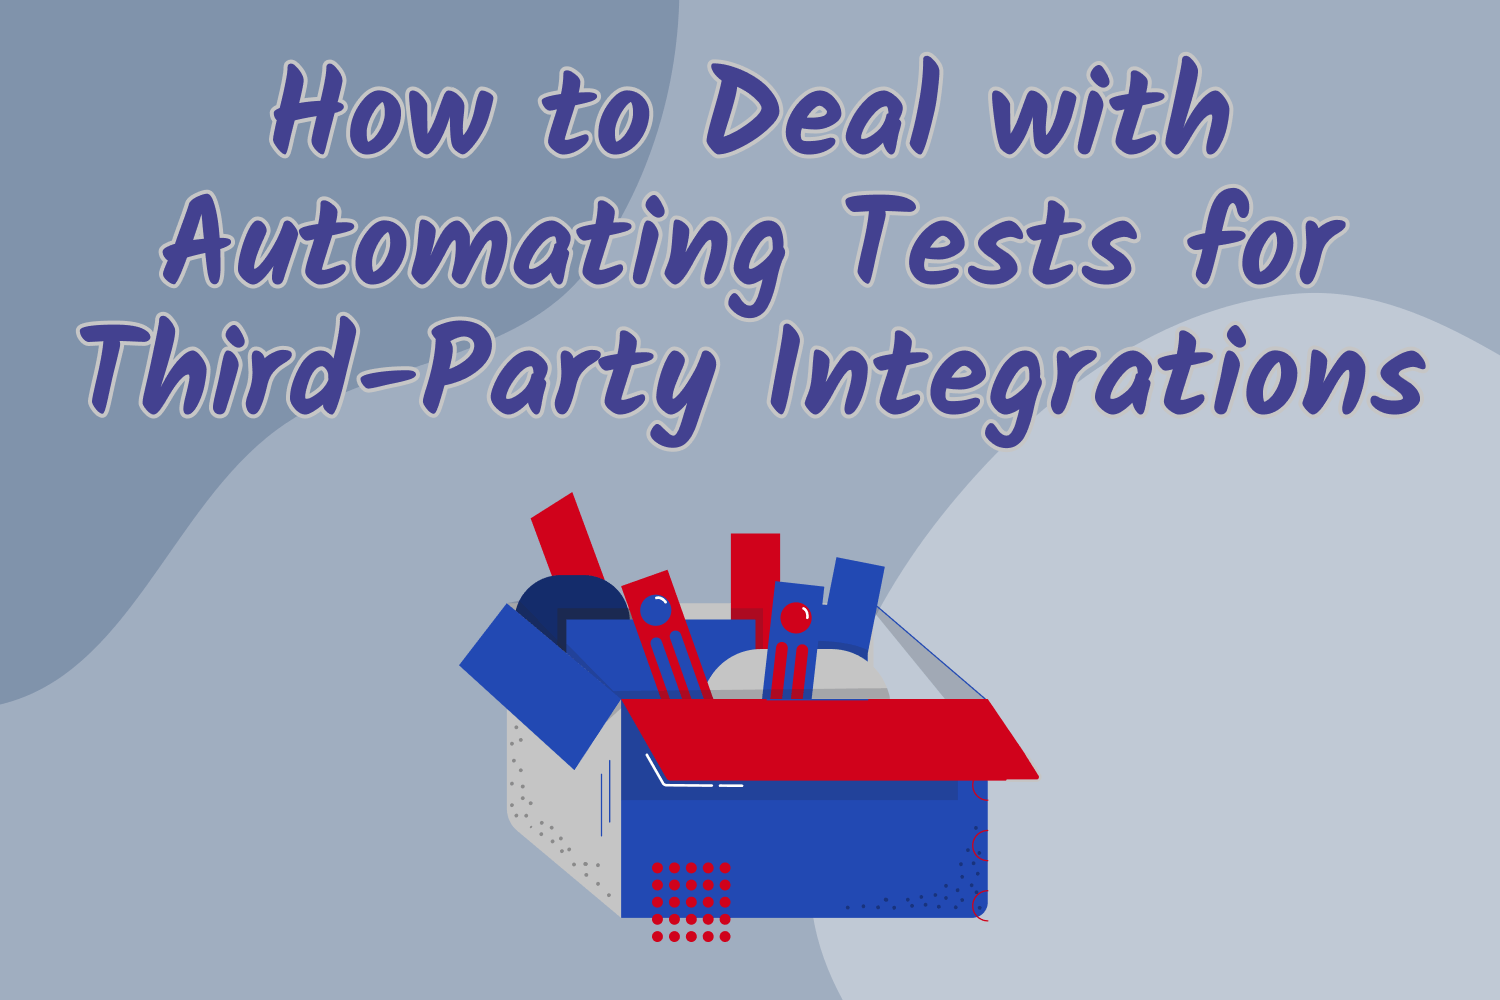 How to Deal with Automating Tests for Third-Party Integrations